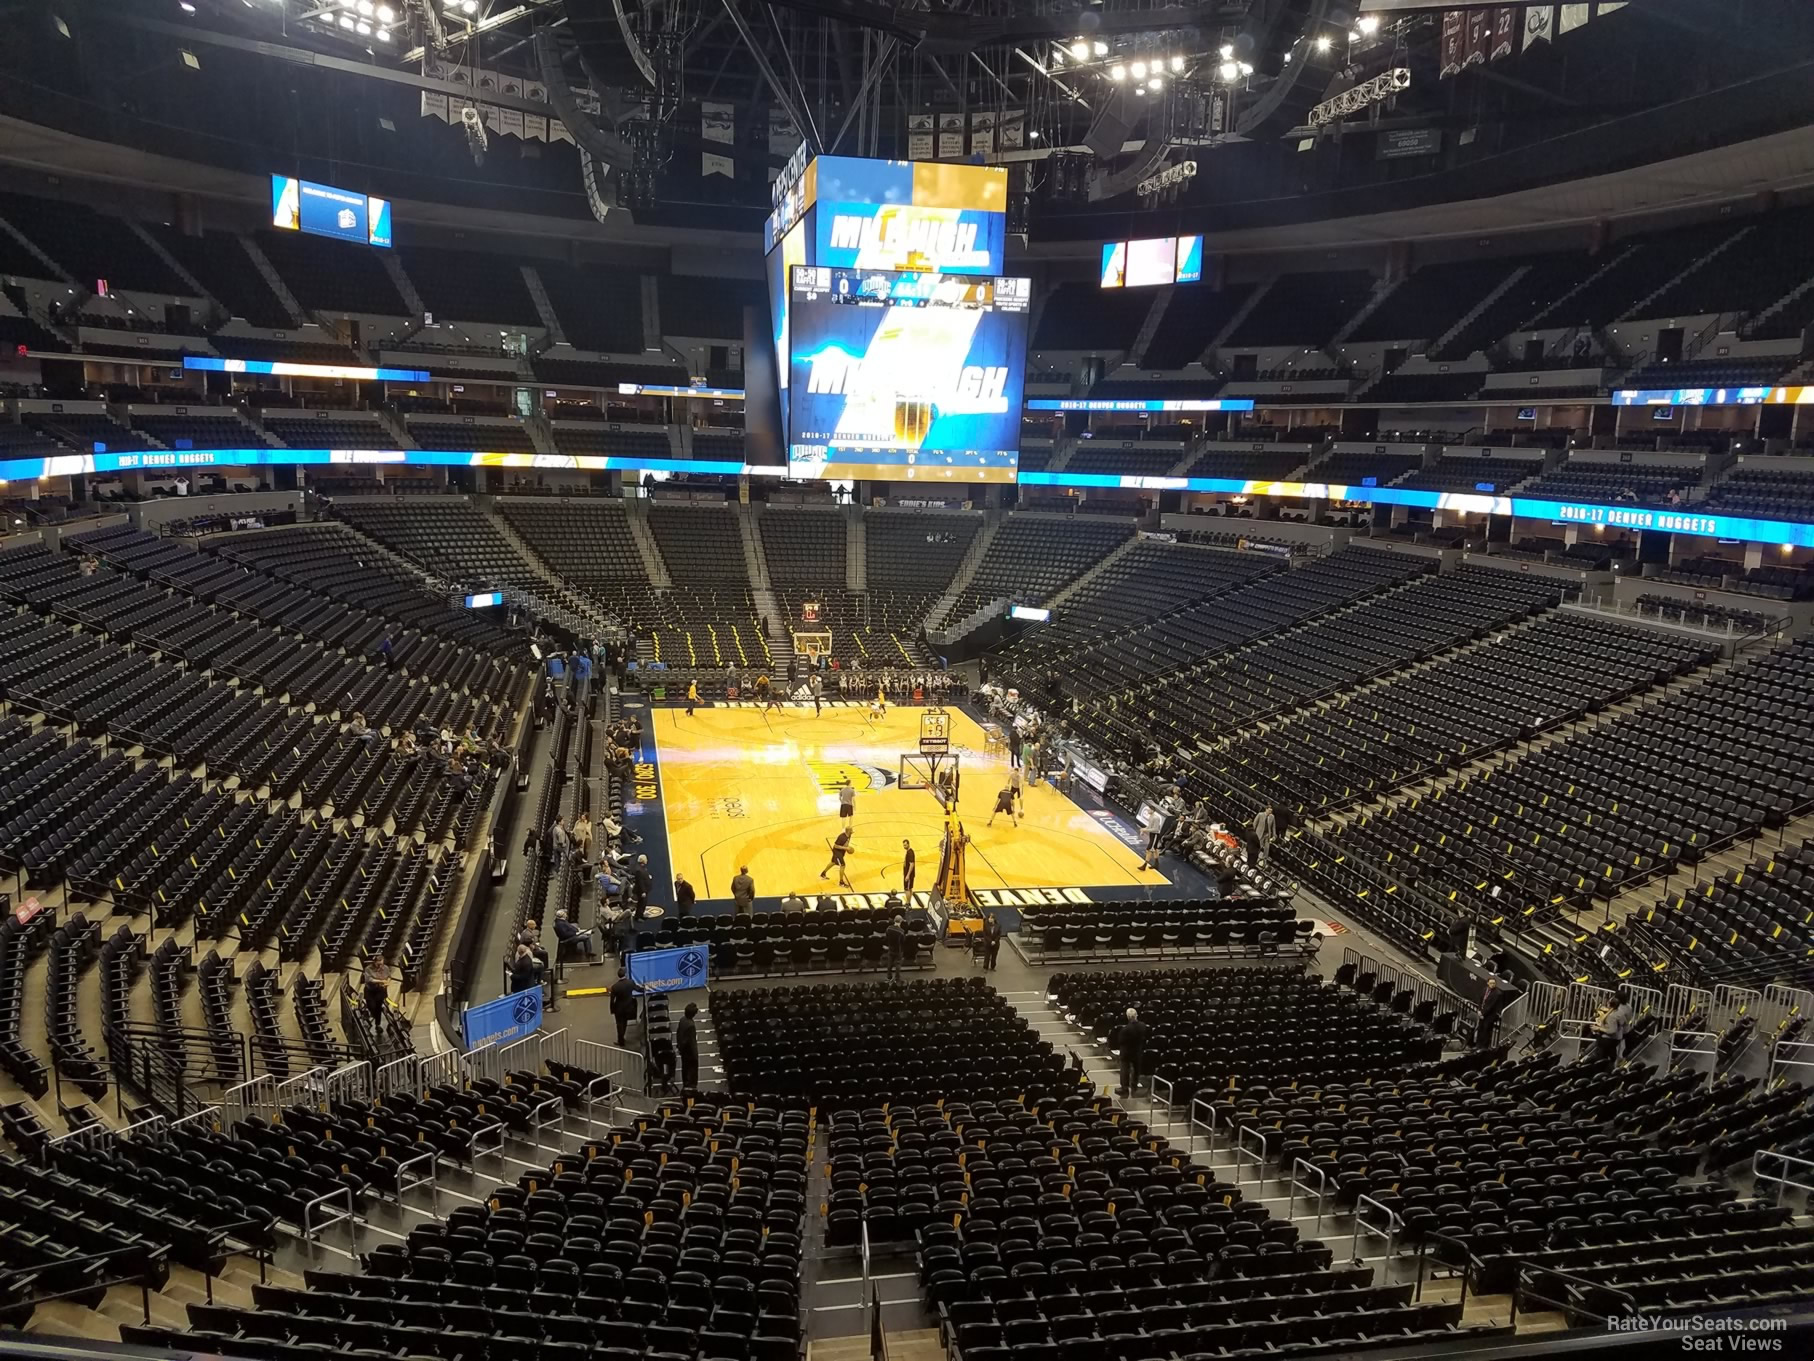 section 218, row 4 seat view  for basketball - ball arena